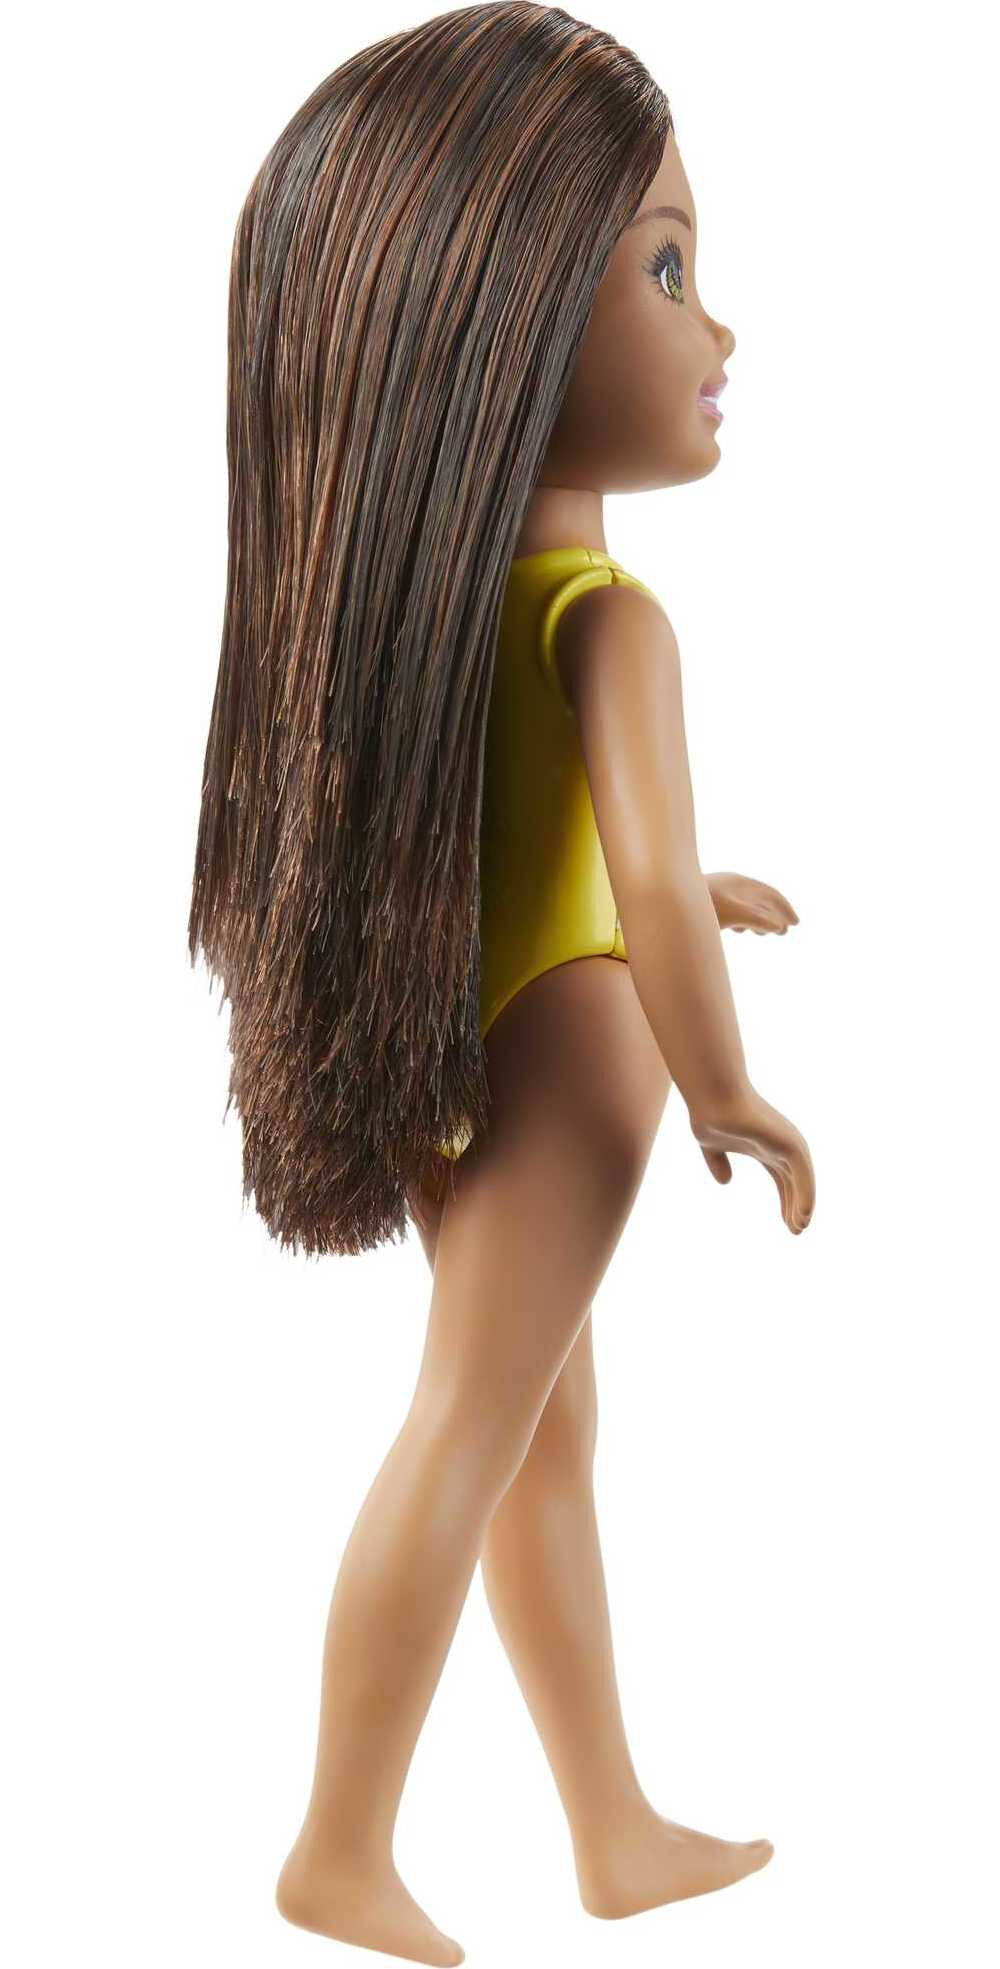 Barbie Club Chelsea Doll, Small Doll with Long Brown Hair, Green Eyes & Pineapple-Graphic Swimsuit - image 4 of 5